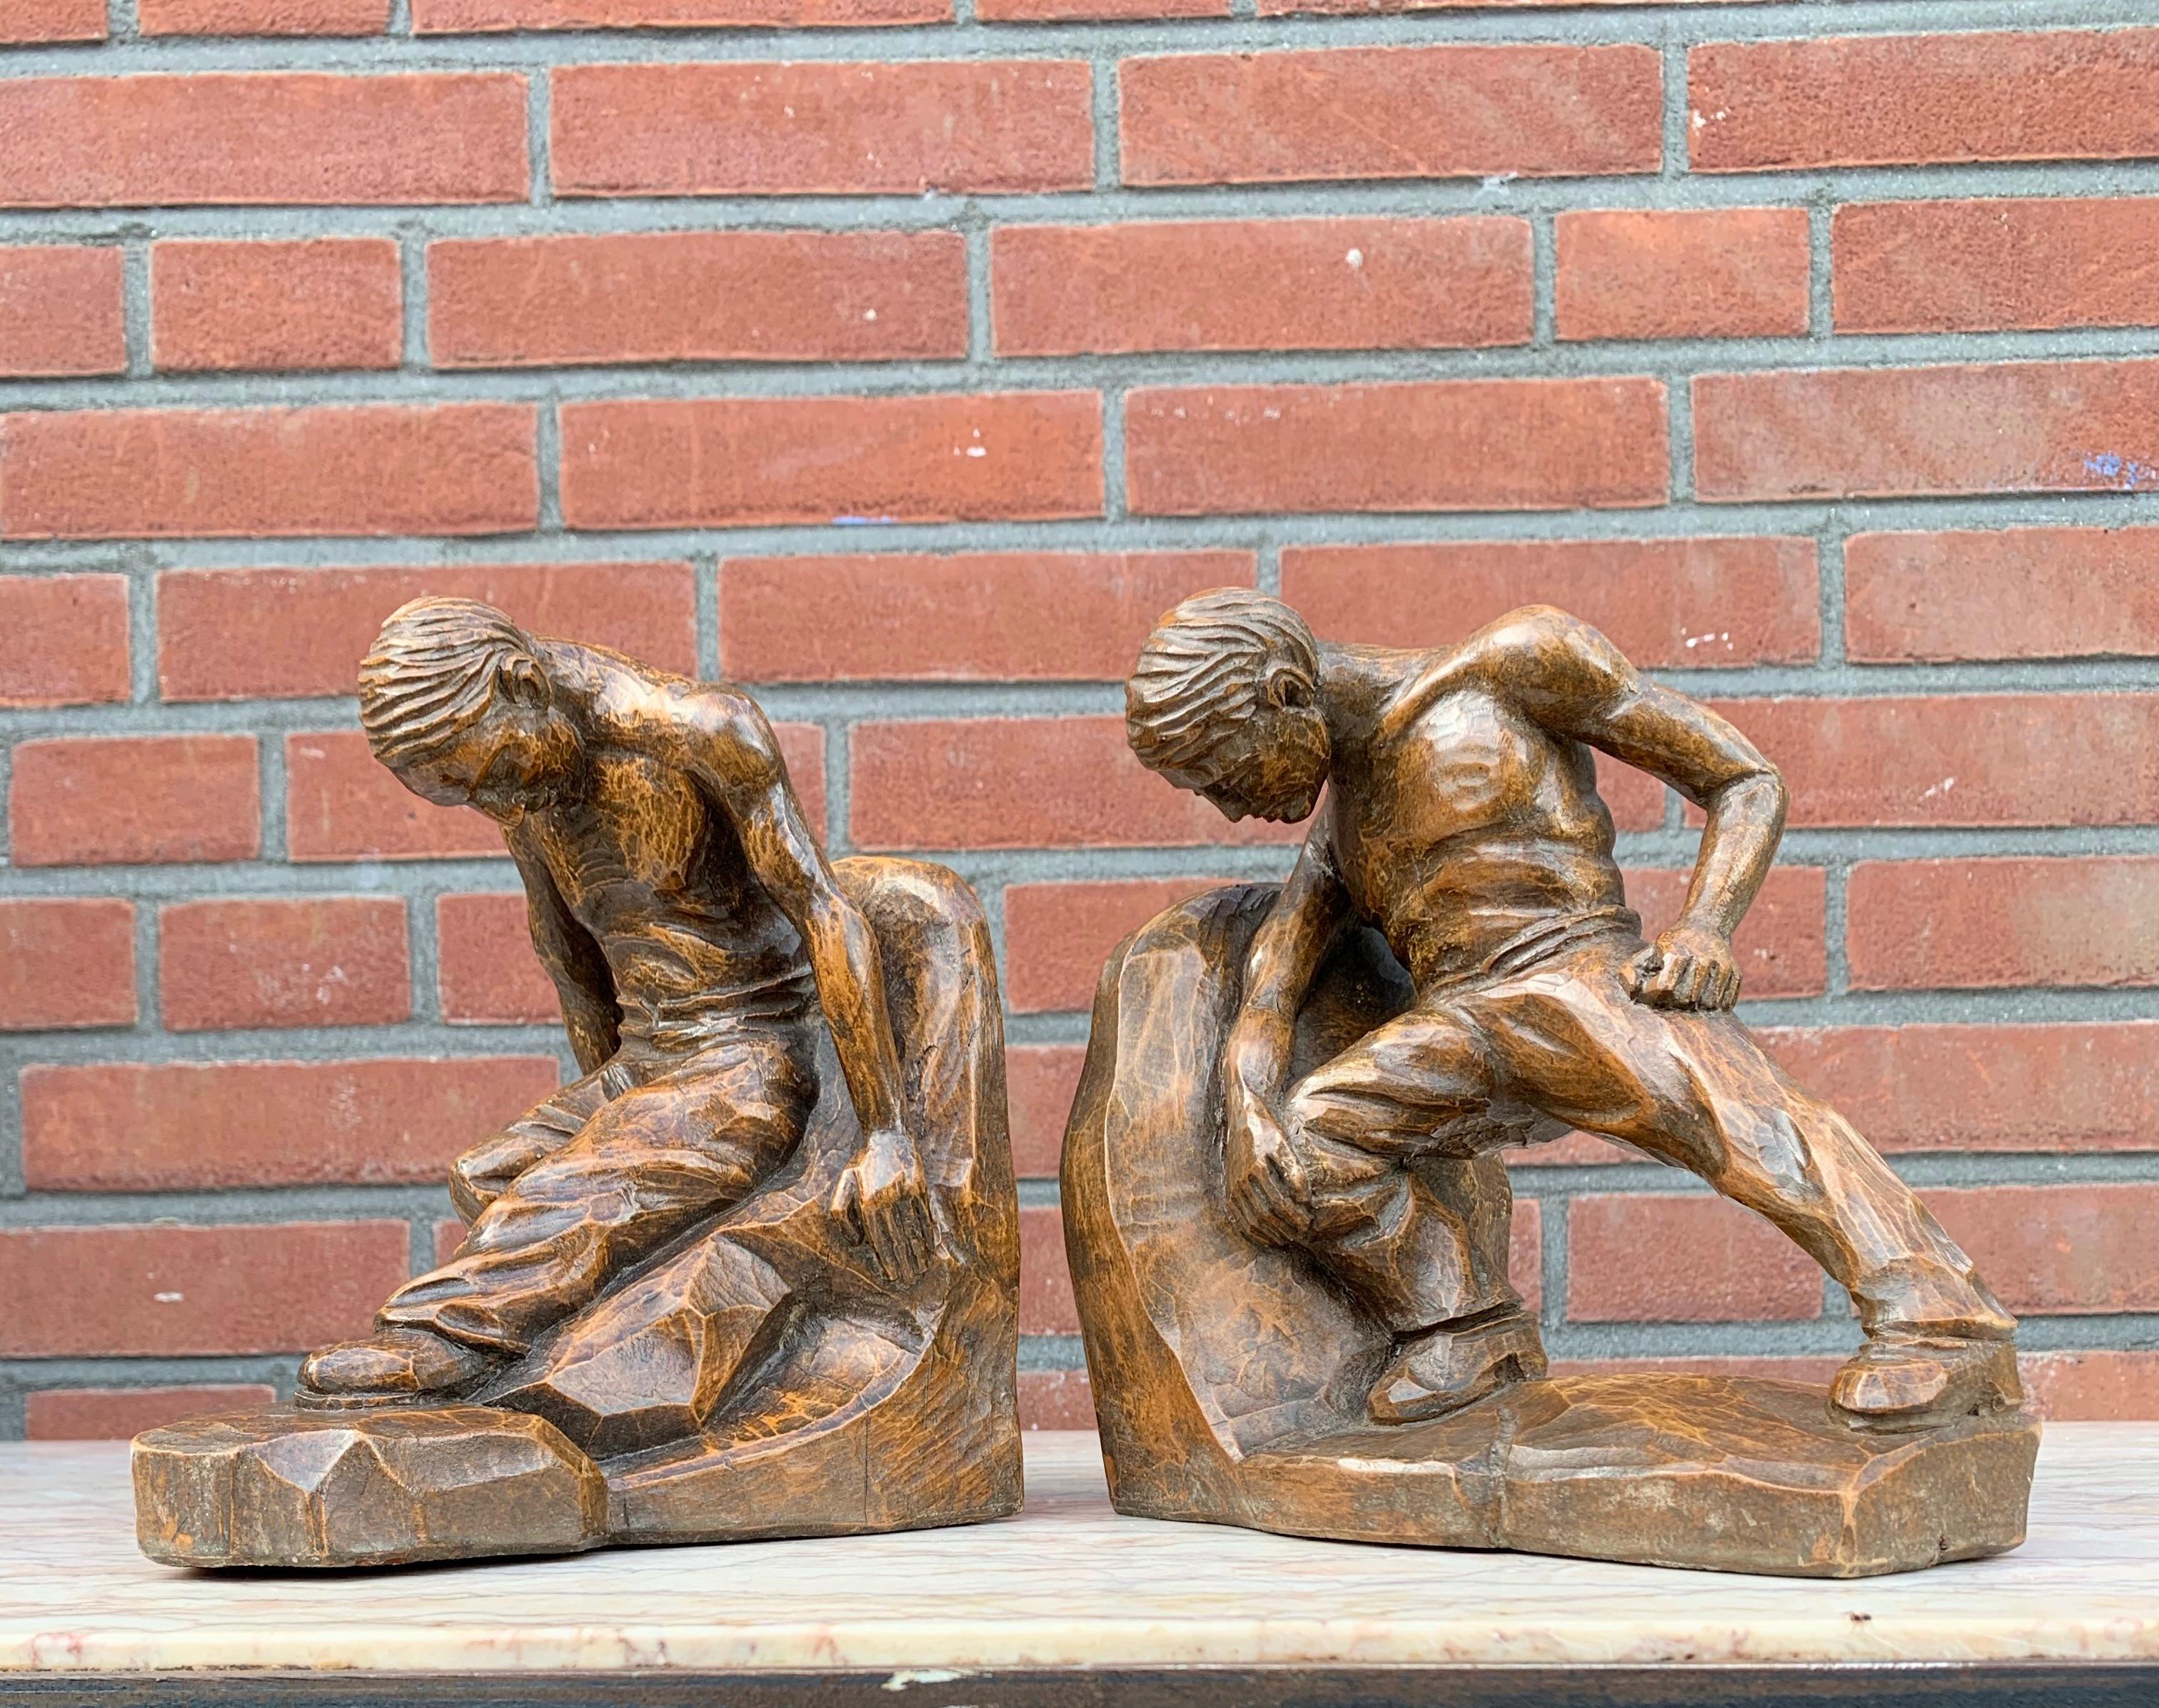 All handcrafted, solid wooden blue collar workers bookends.

If you or your friends have a house from the Arts & Crafts period than this unique pair could be the perfect gift. These hand carved, hard working men sculptures make great decoration on a